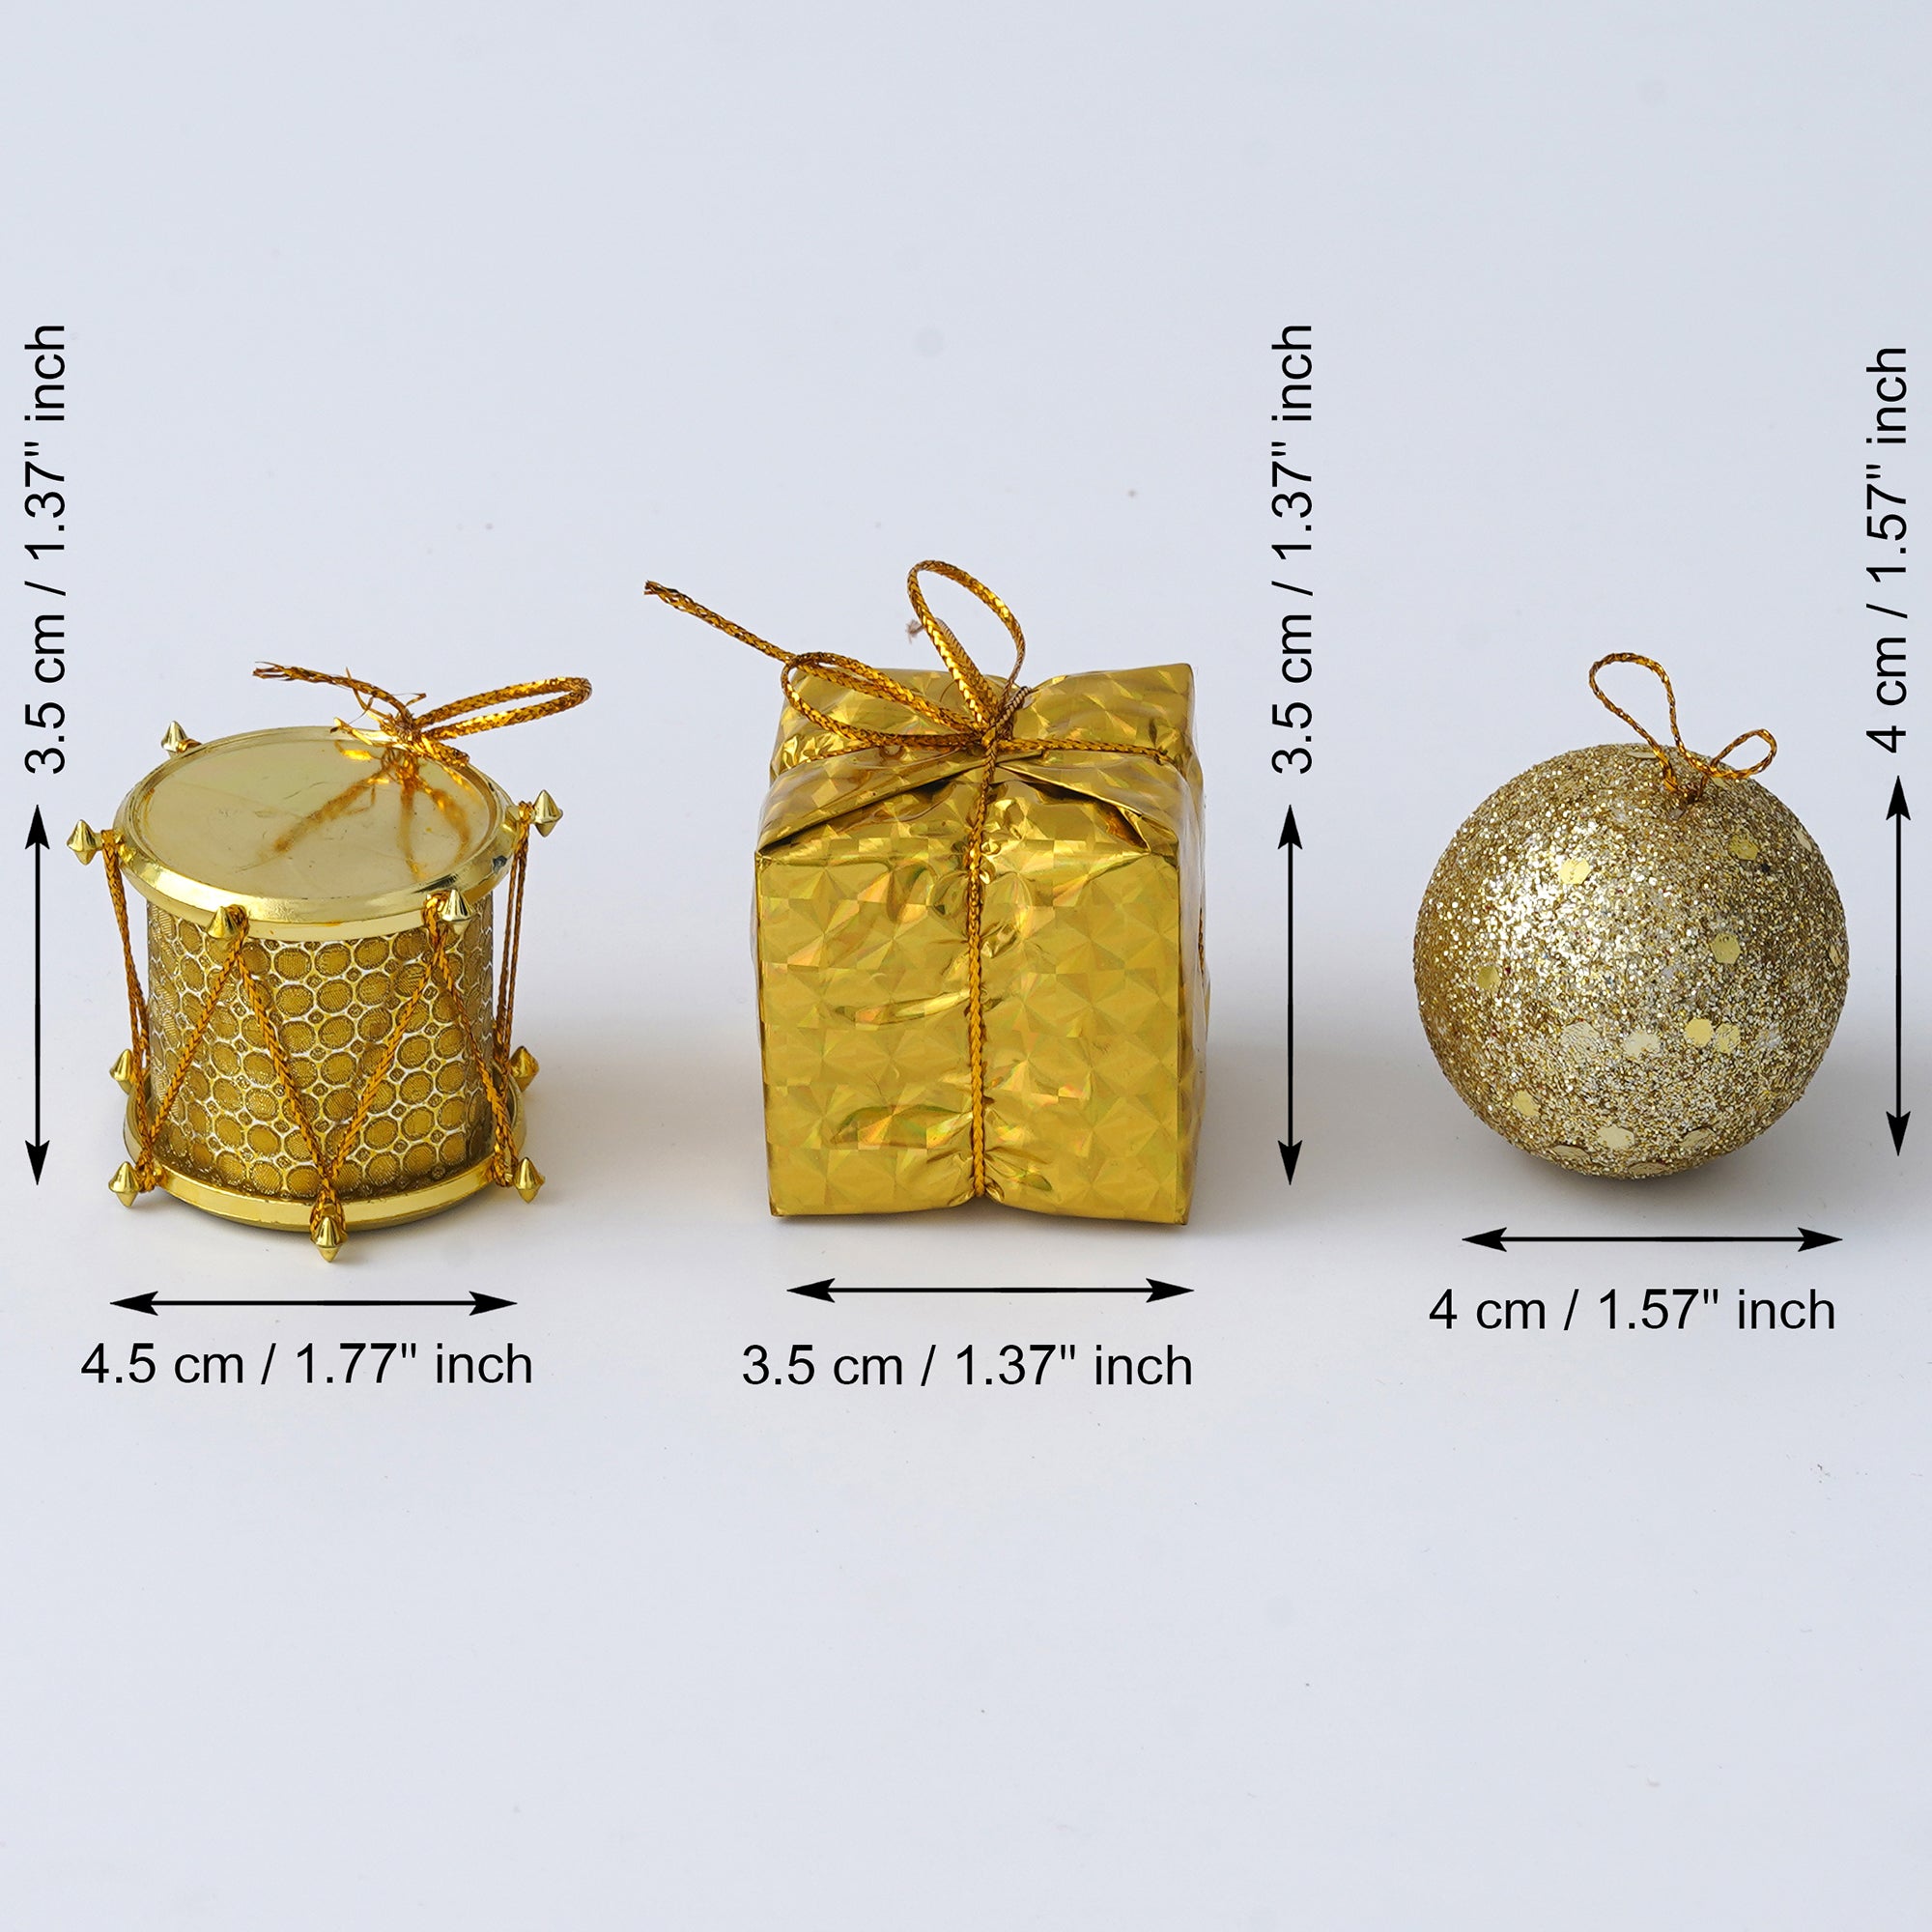 eCraftIndia Golden Christmas Tree Decoration Items  Balls, Gifts, Drums 3